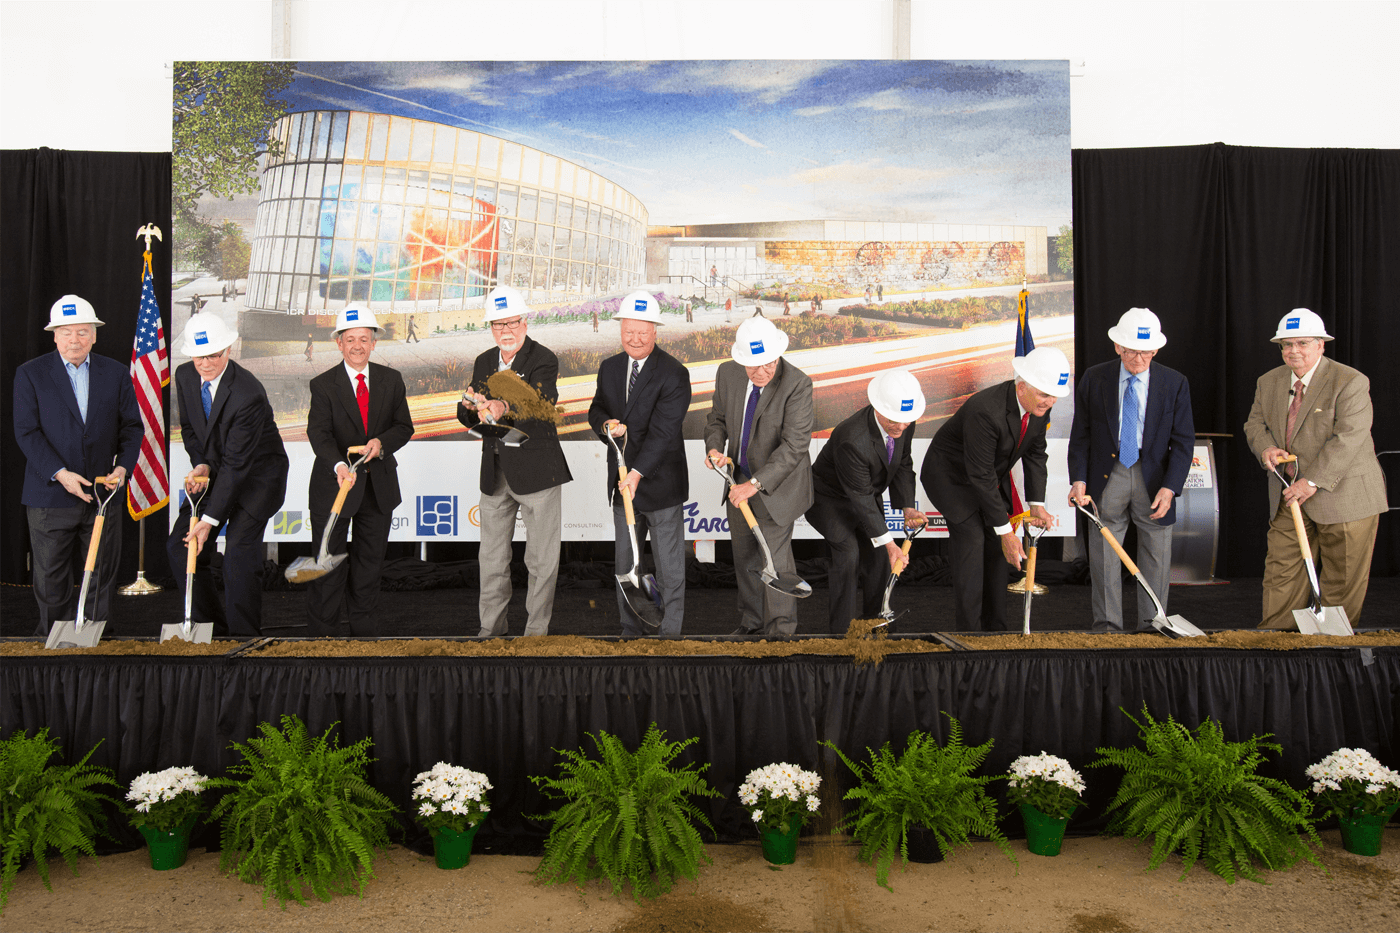 The groundbreaking ceremony for the ICR Discovery Center